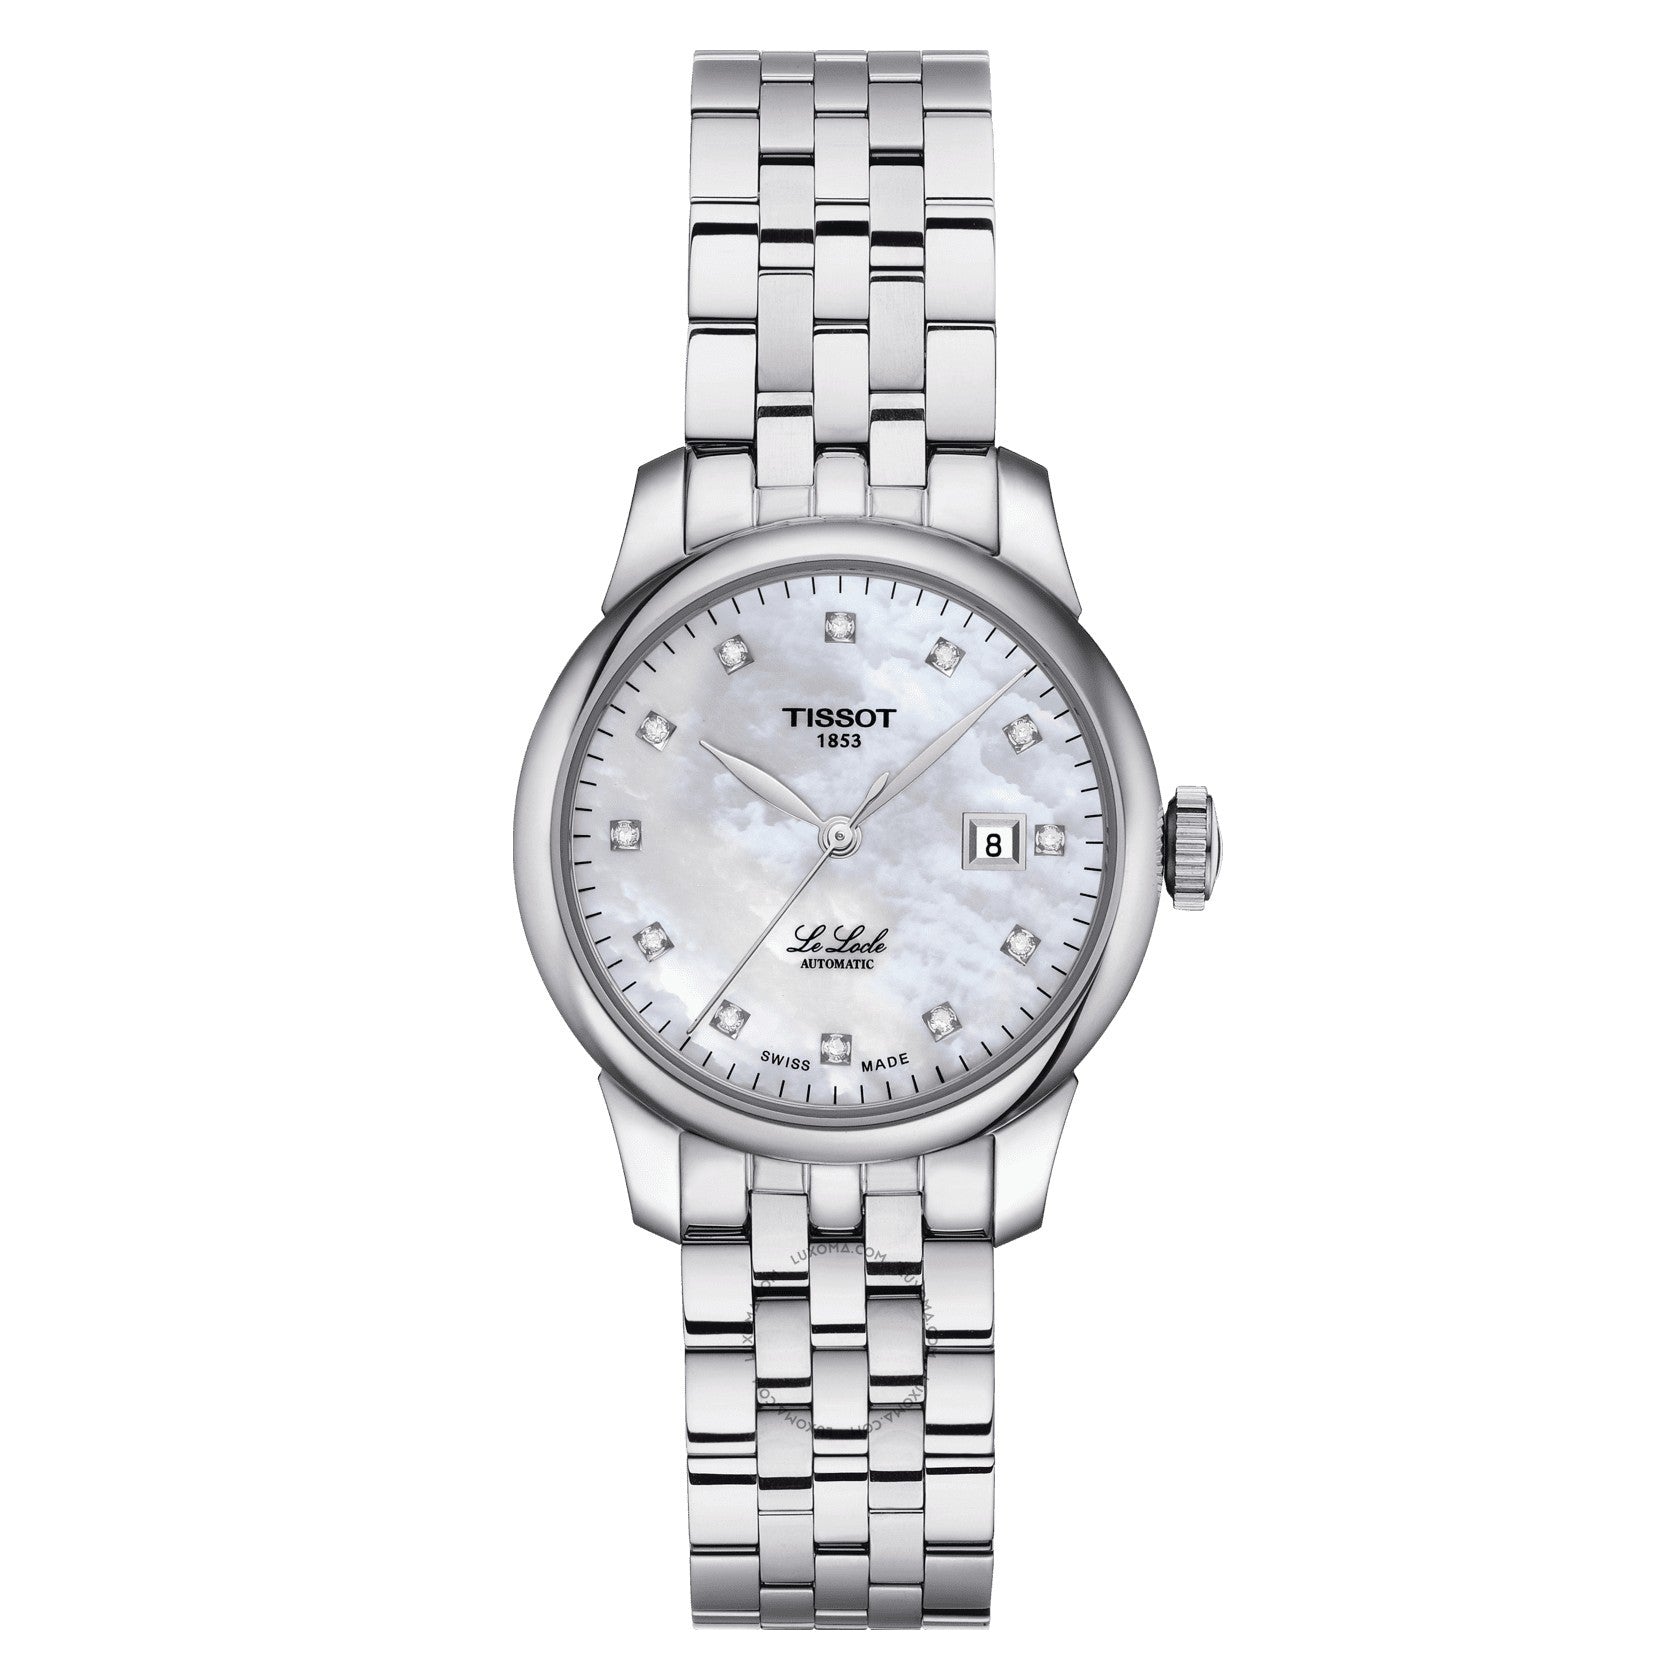 Tissot Le Locle Automatic Mother of Pearl Dial Ladies Watch T006.207.11.116.00